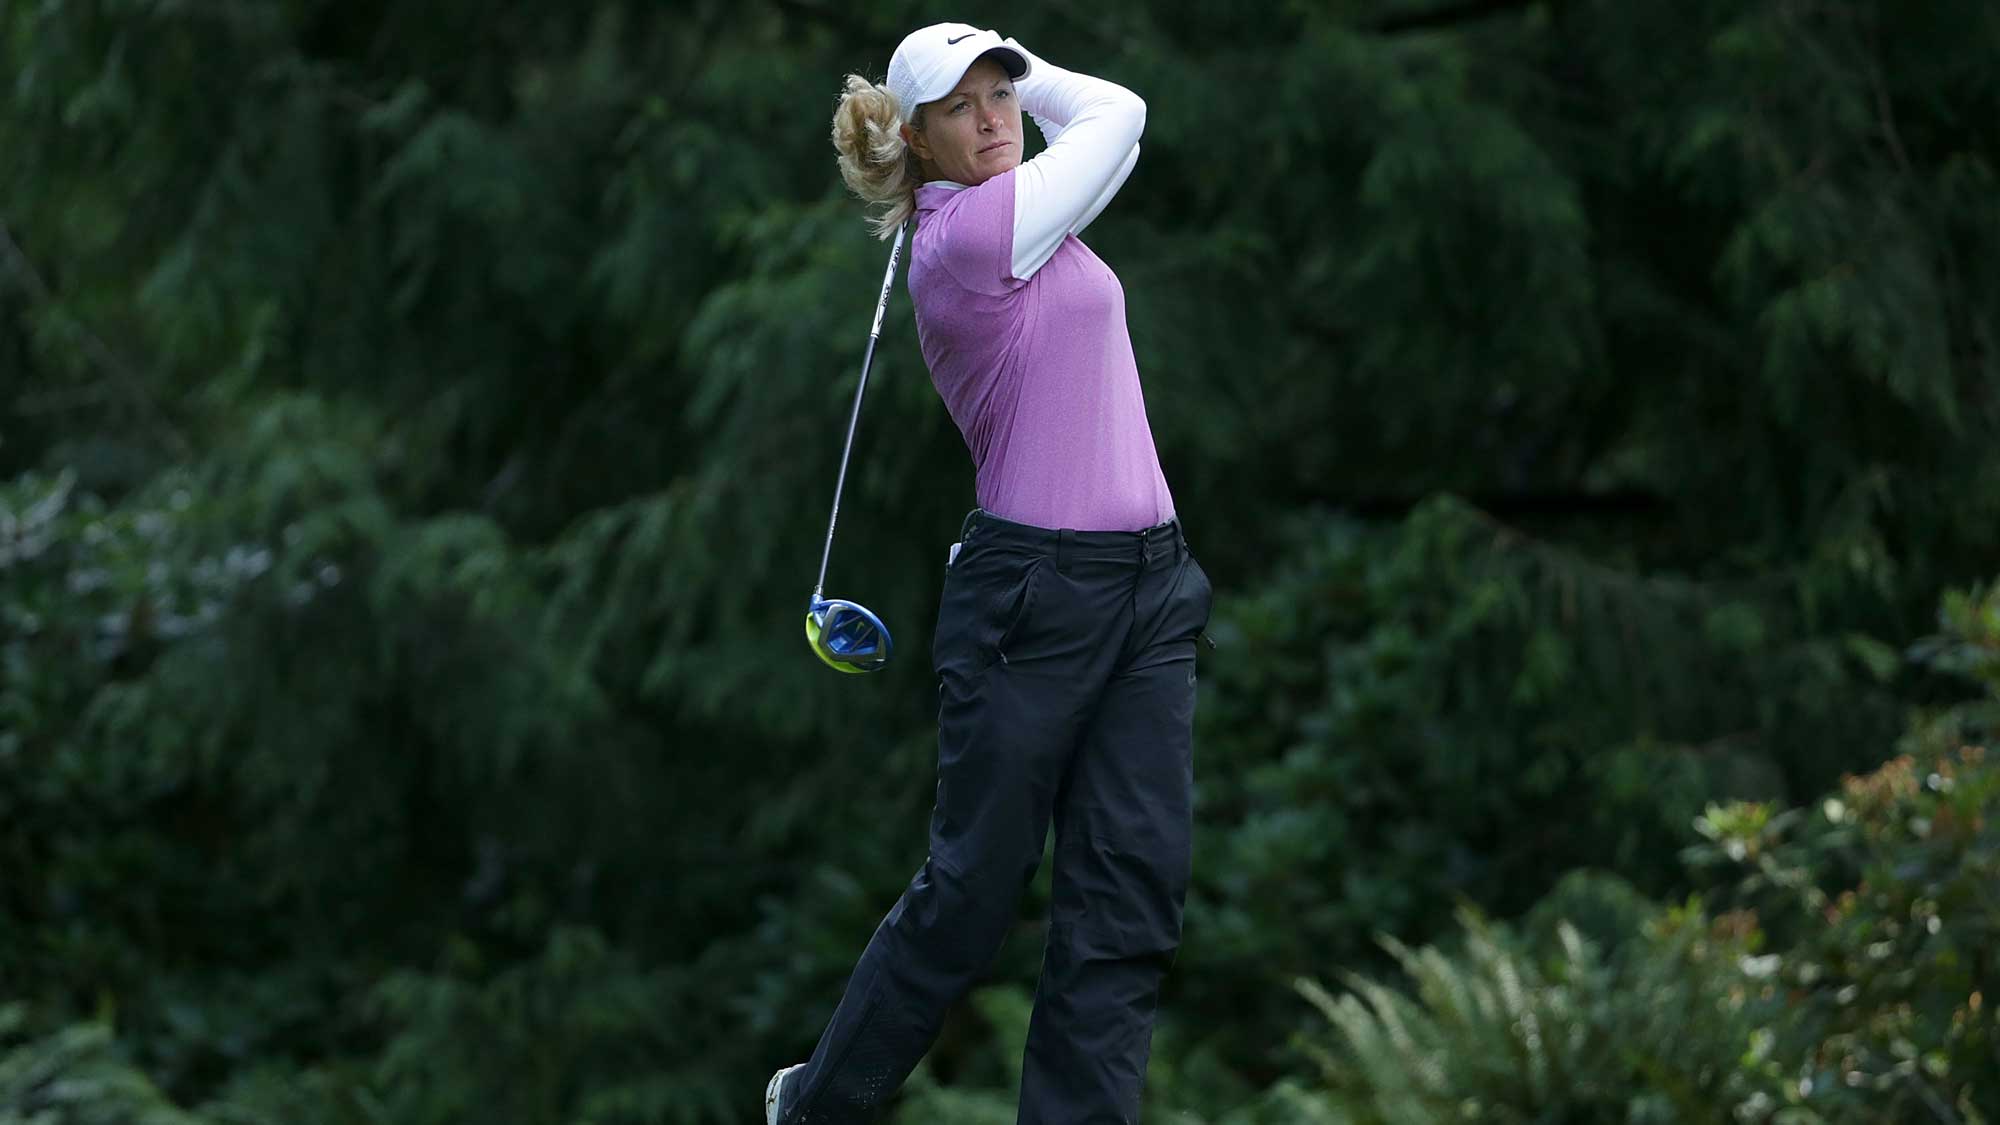 Suzann Pettersen of Norway hits a tee shot on the fourth hole during the third round of the KPMG Women's PGA Championship